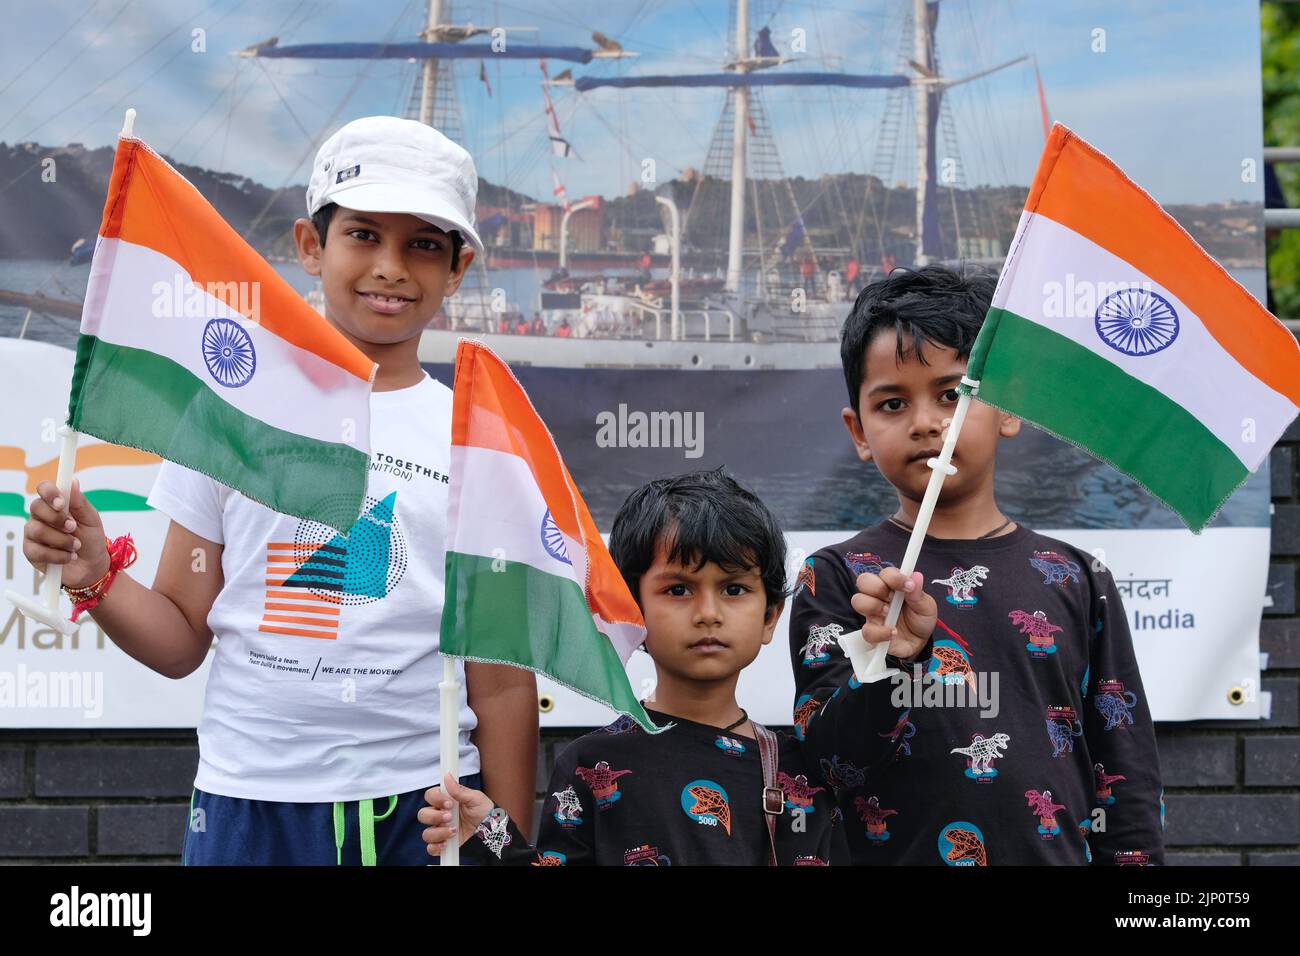 London, UK, 14th August, 2022. The Indian diaspora in London enthusiastically welcomed the arrival of Indian Navy Sail Training Ship, 'Tarangini' ahead of India's 75th Independence Day, which falls on the 15th August. The ship berthed in Canary Wharf, is one of seven Indian vessels that sailed to different cities worldwide to mark the occasion.  Credit: Eleventh Hour Photography/Alamy Live News Stock Photo